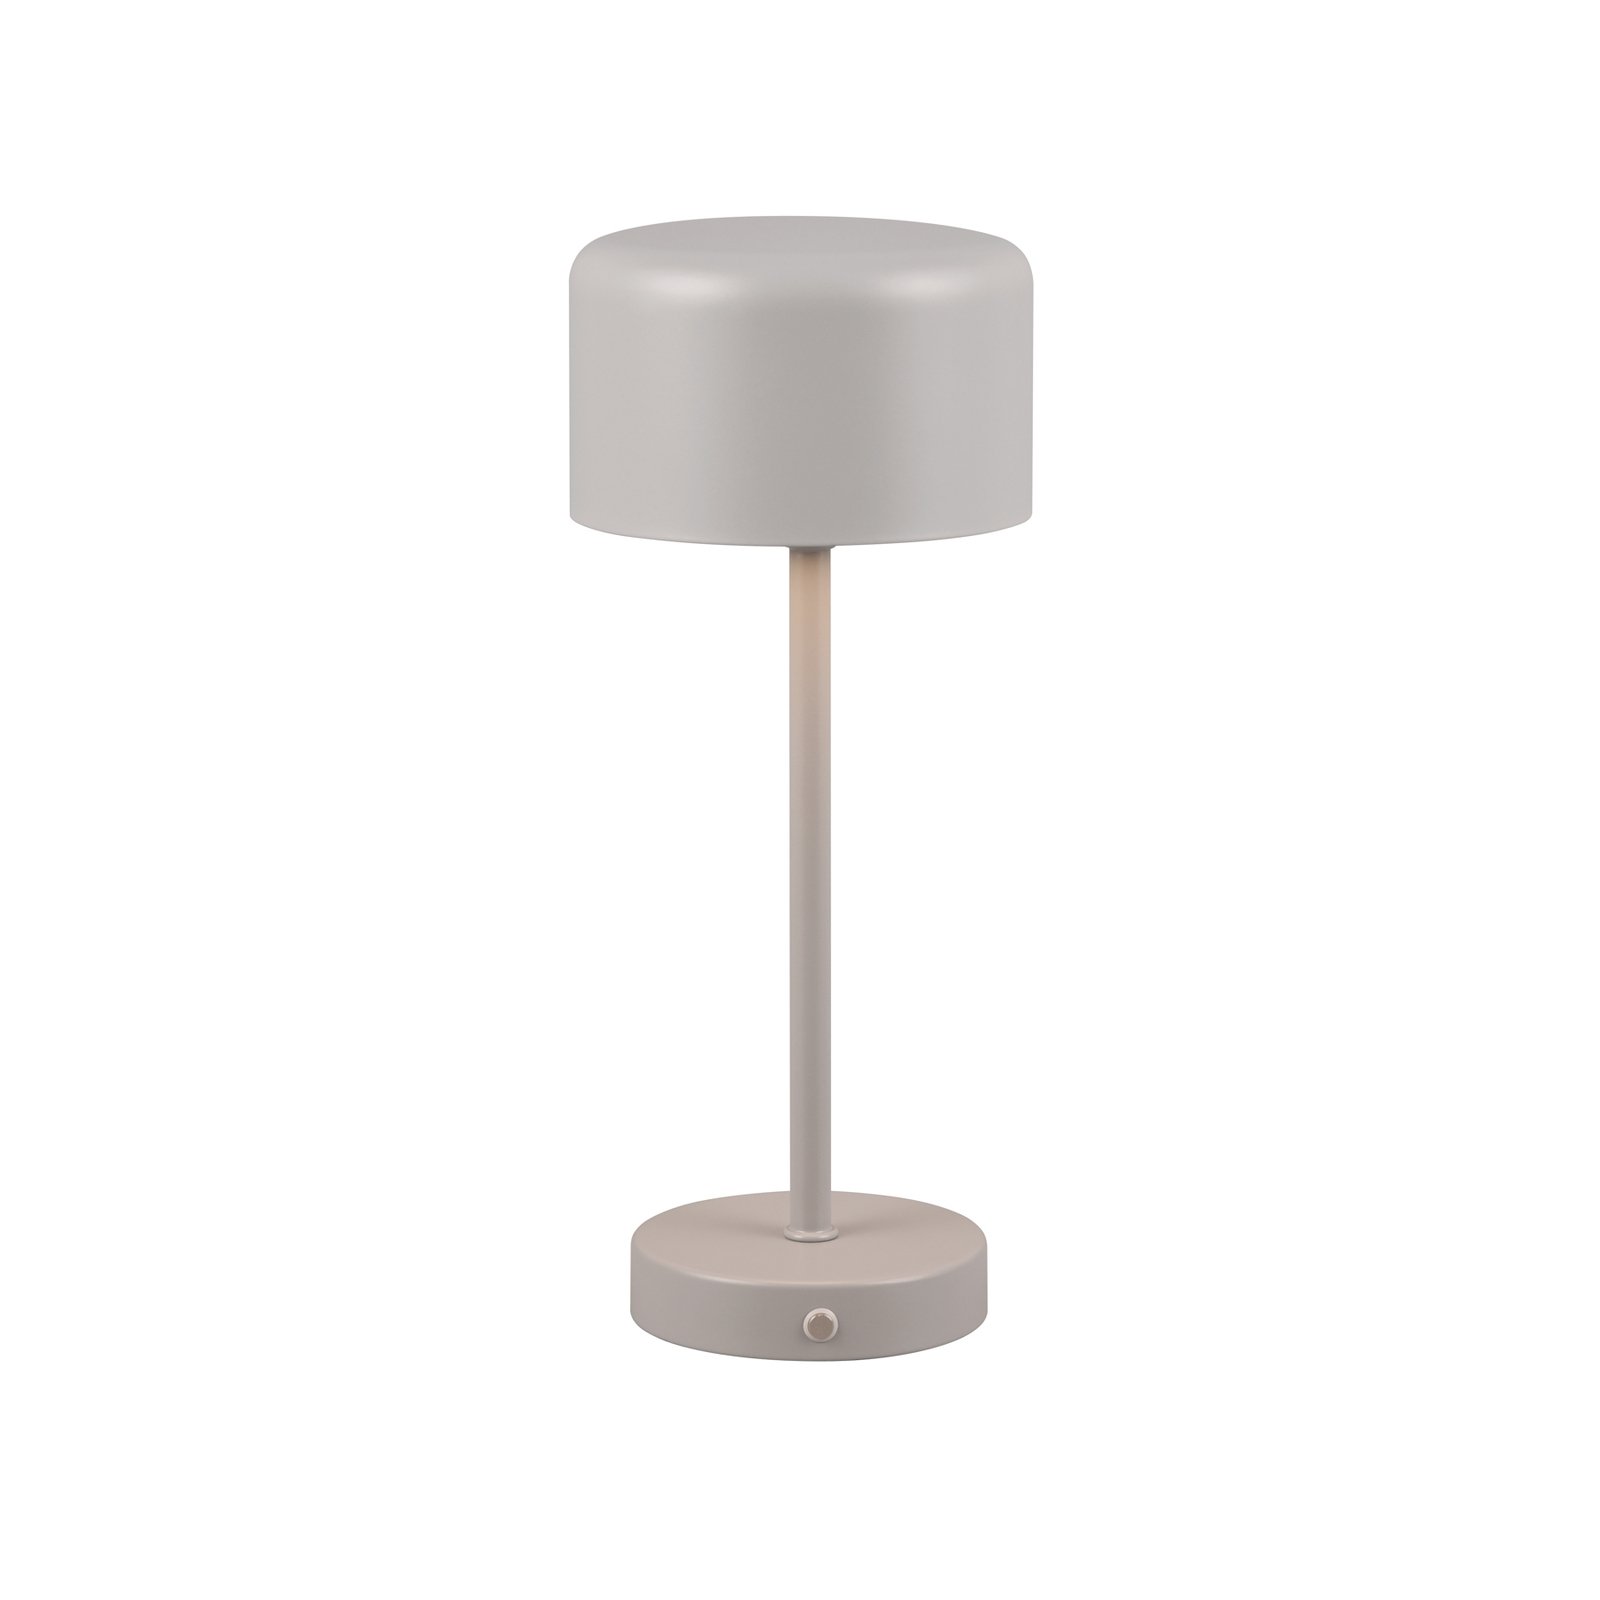 Jeff rechargeable LED table lamp, grey, height 30 cm, metal